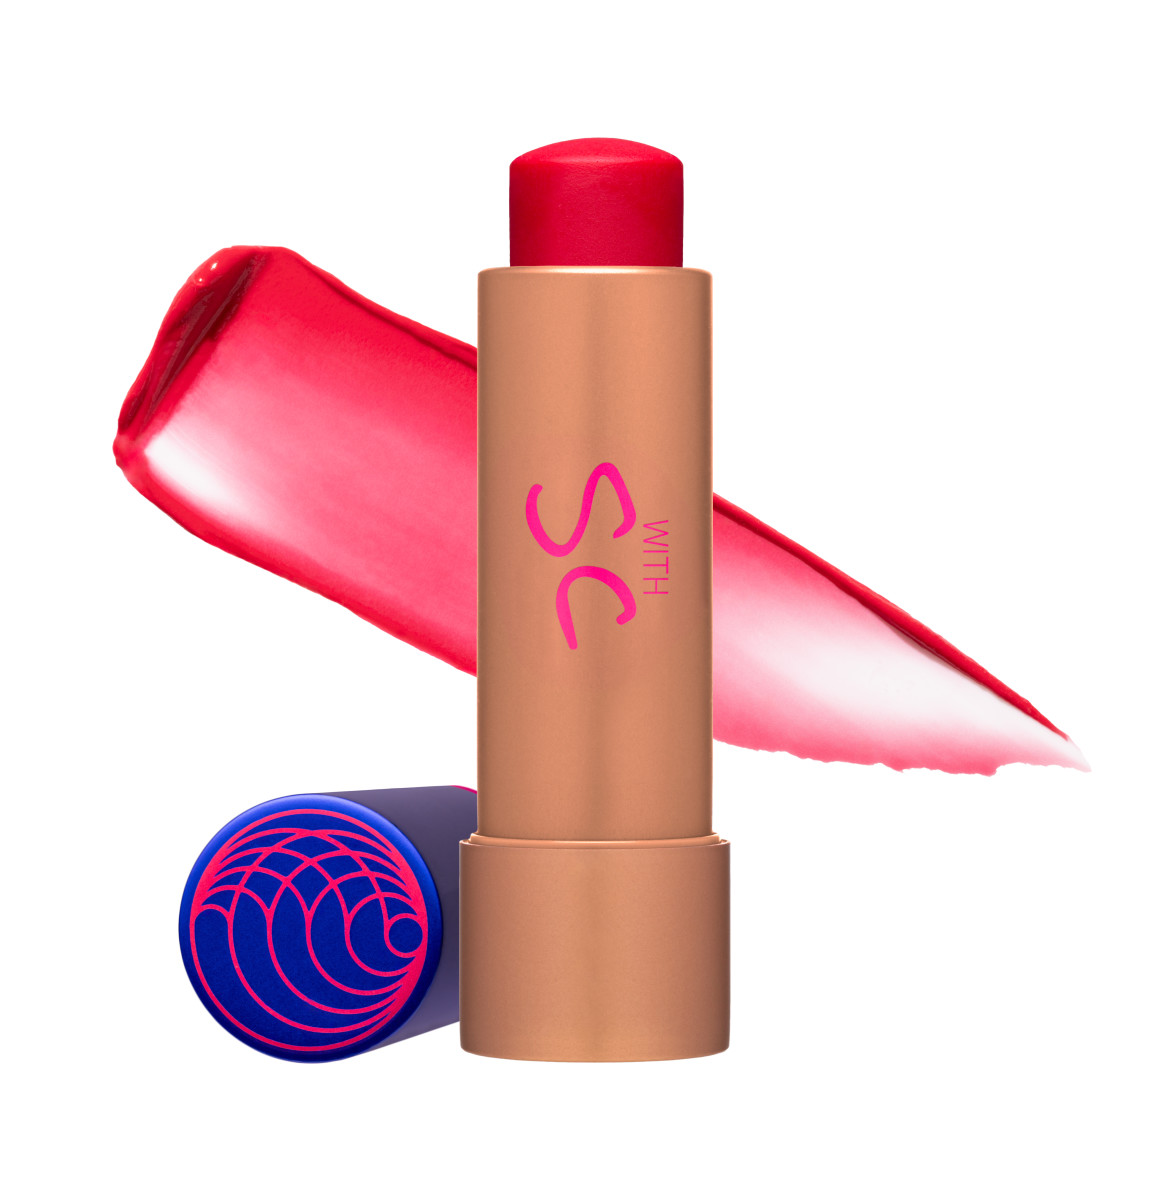 Augustinus Bader x Sofia Coppola The Tinted Balm in Shade 1, $43, available here.